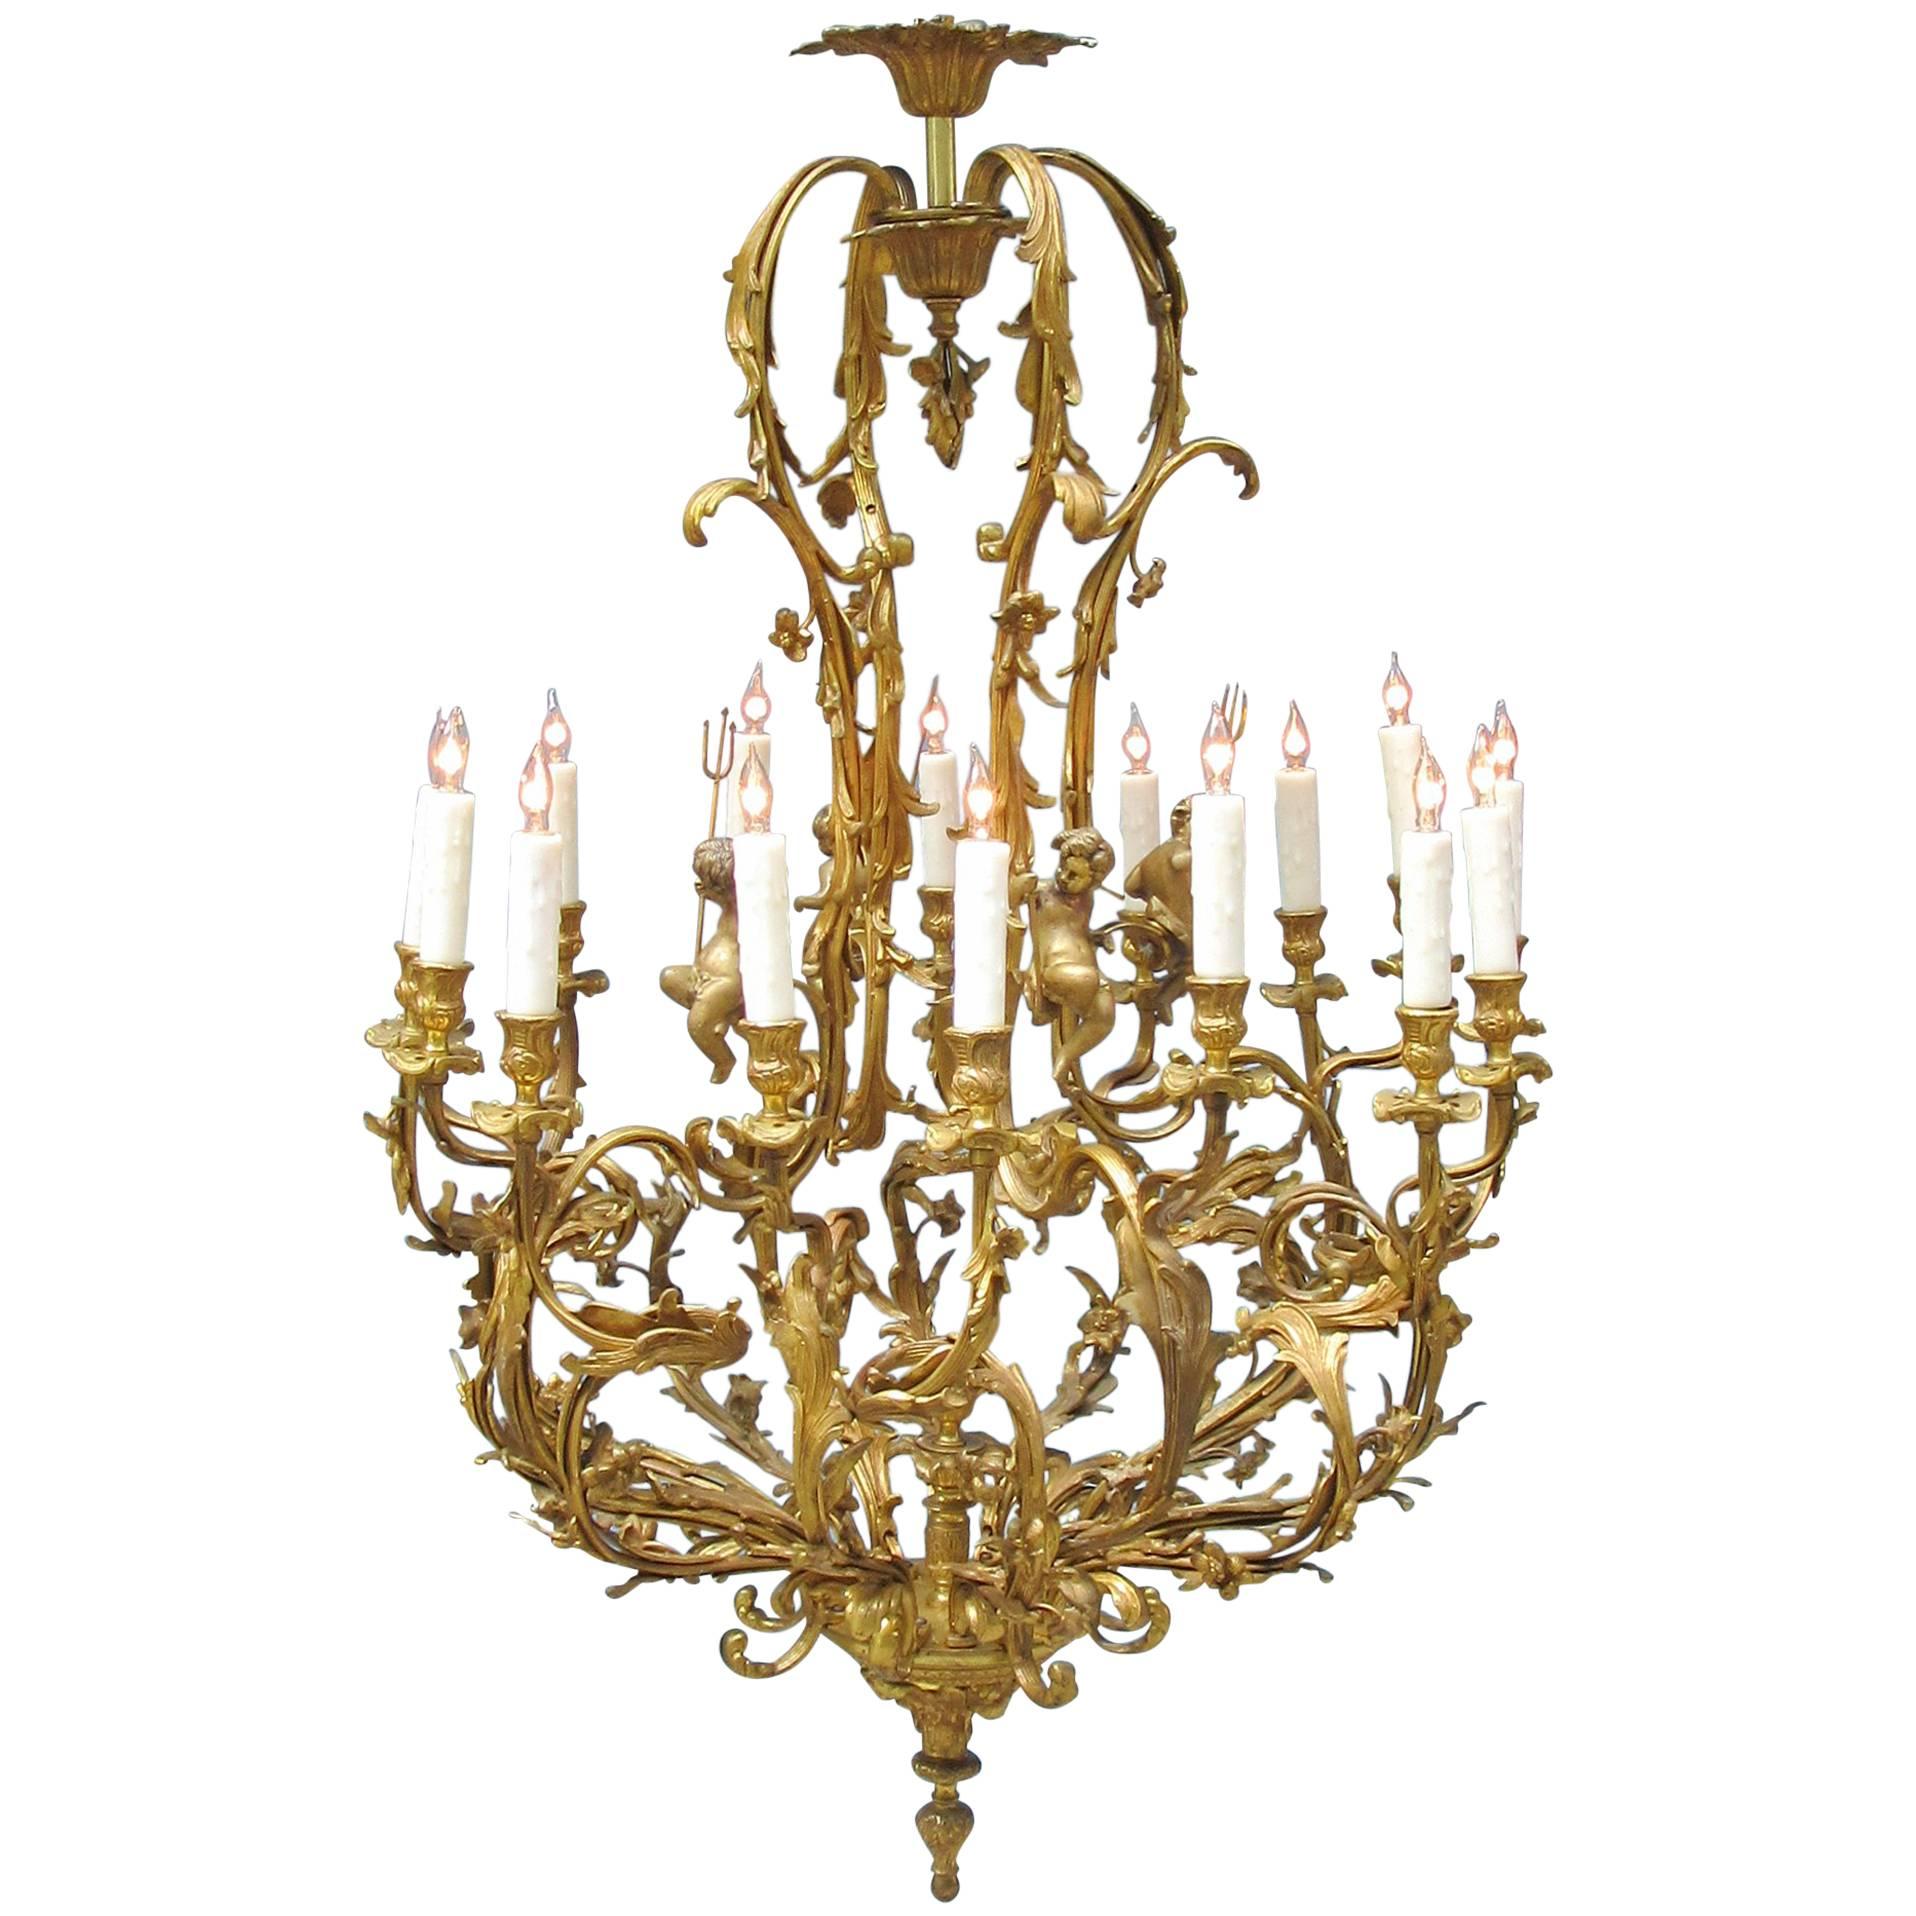 Early 20th Century French Louis XIV Bronze Doré Foliate and Putti Chandelier